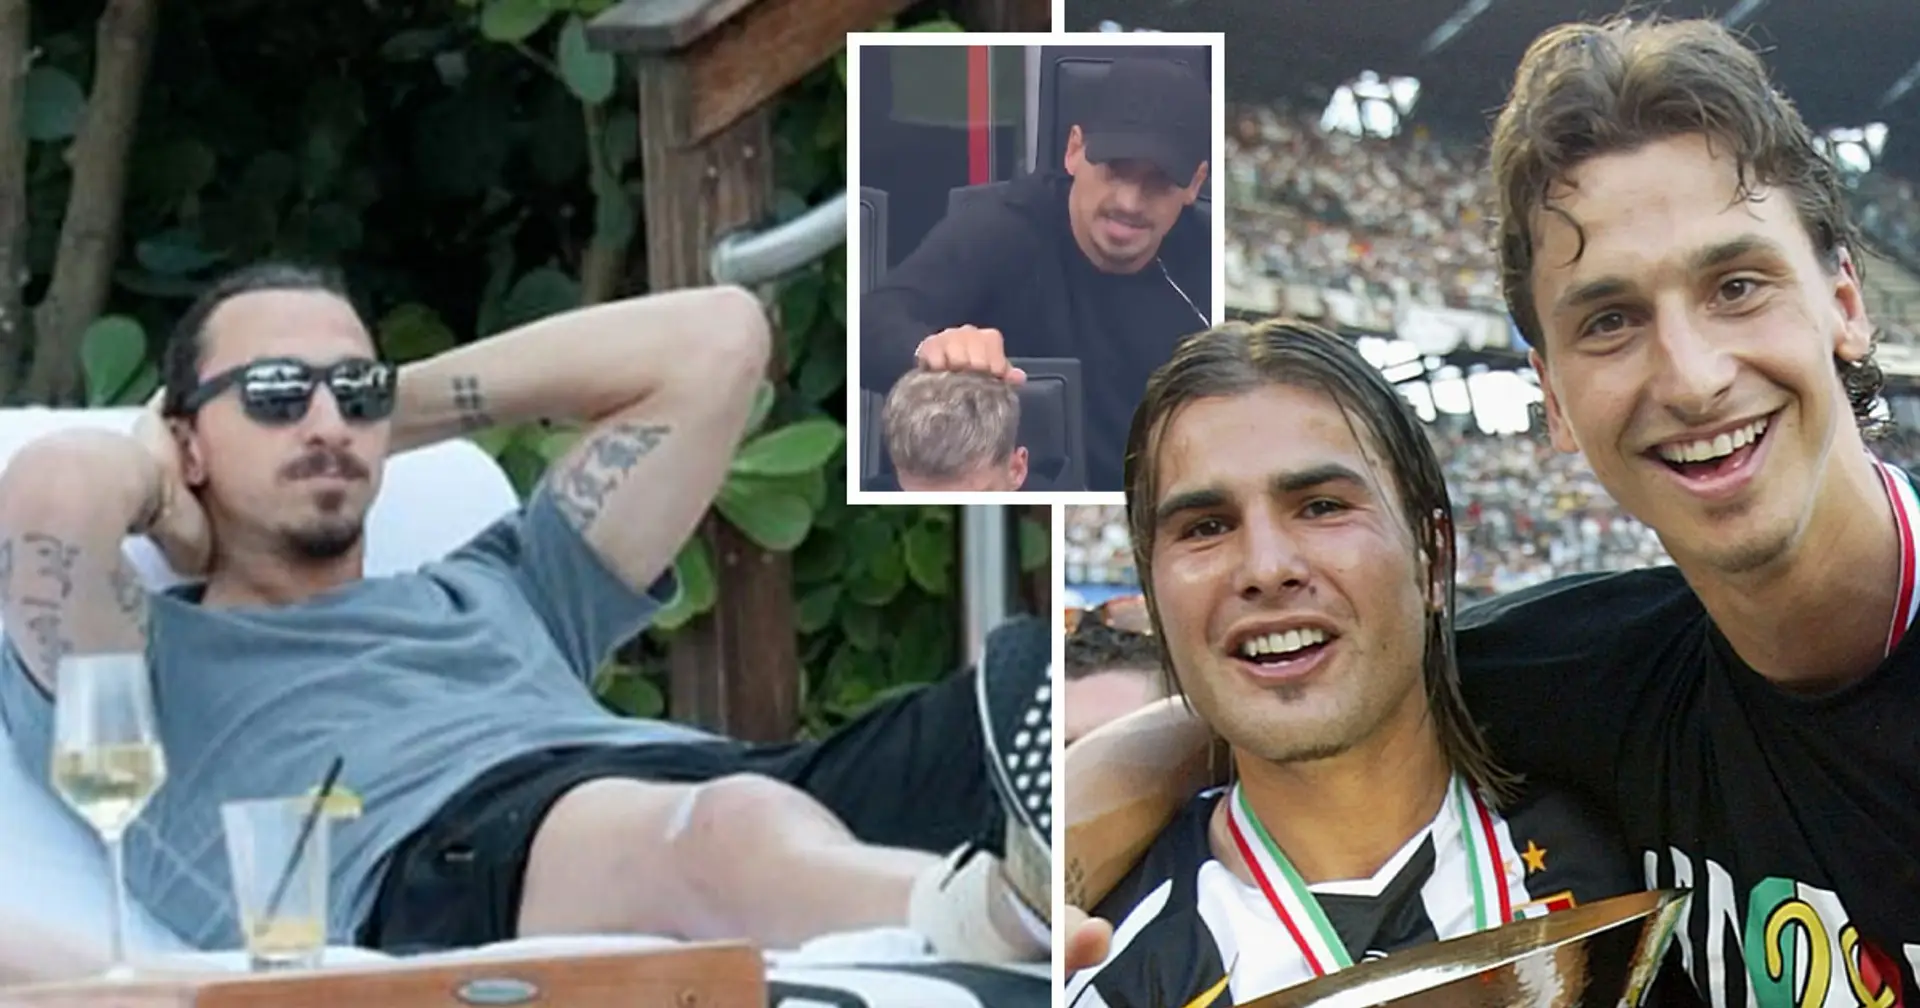 'He instantly burst into tears': Adrian Mutu claims Zlatan Ibrahimovic dangled crying Juventus teammate out of hotel window